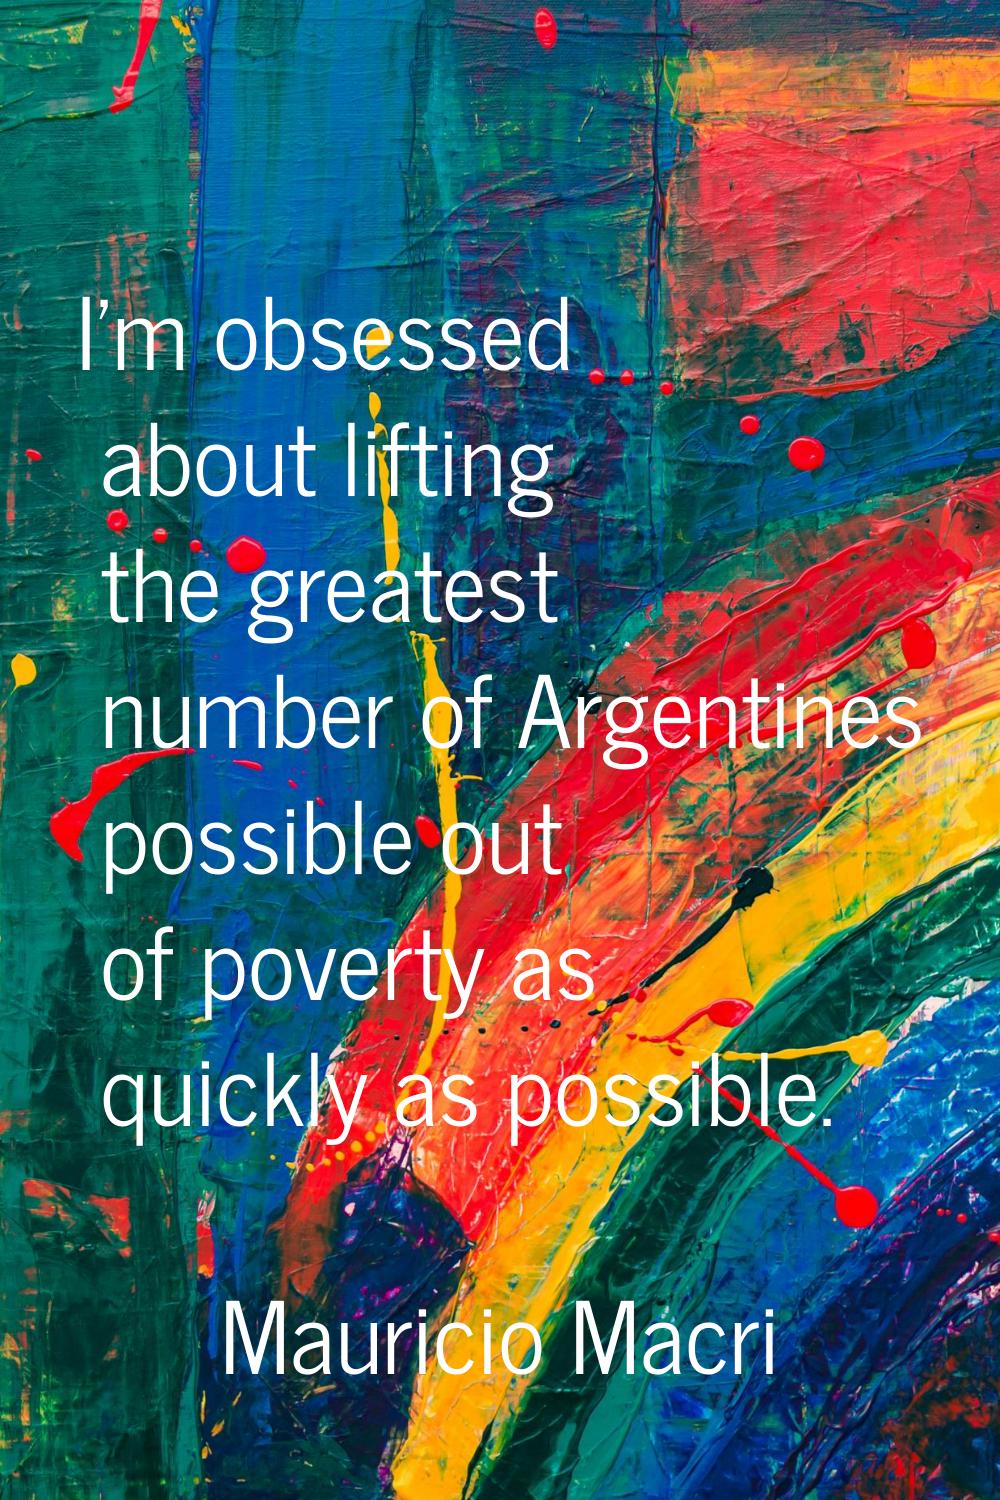 I'm obsessed about lifting the greatest number of Argentines possible out of poverty as quickly as 